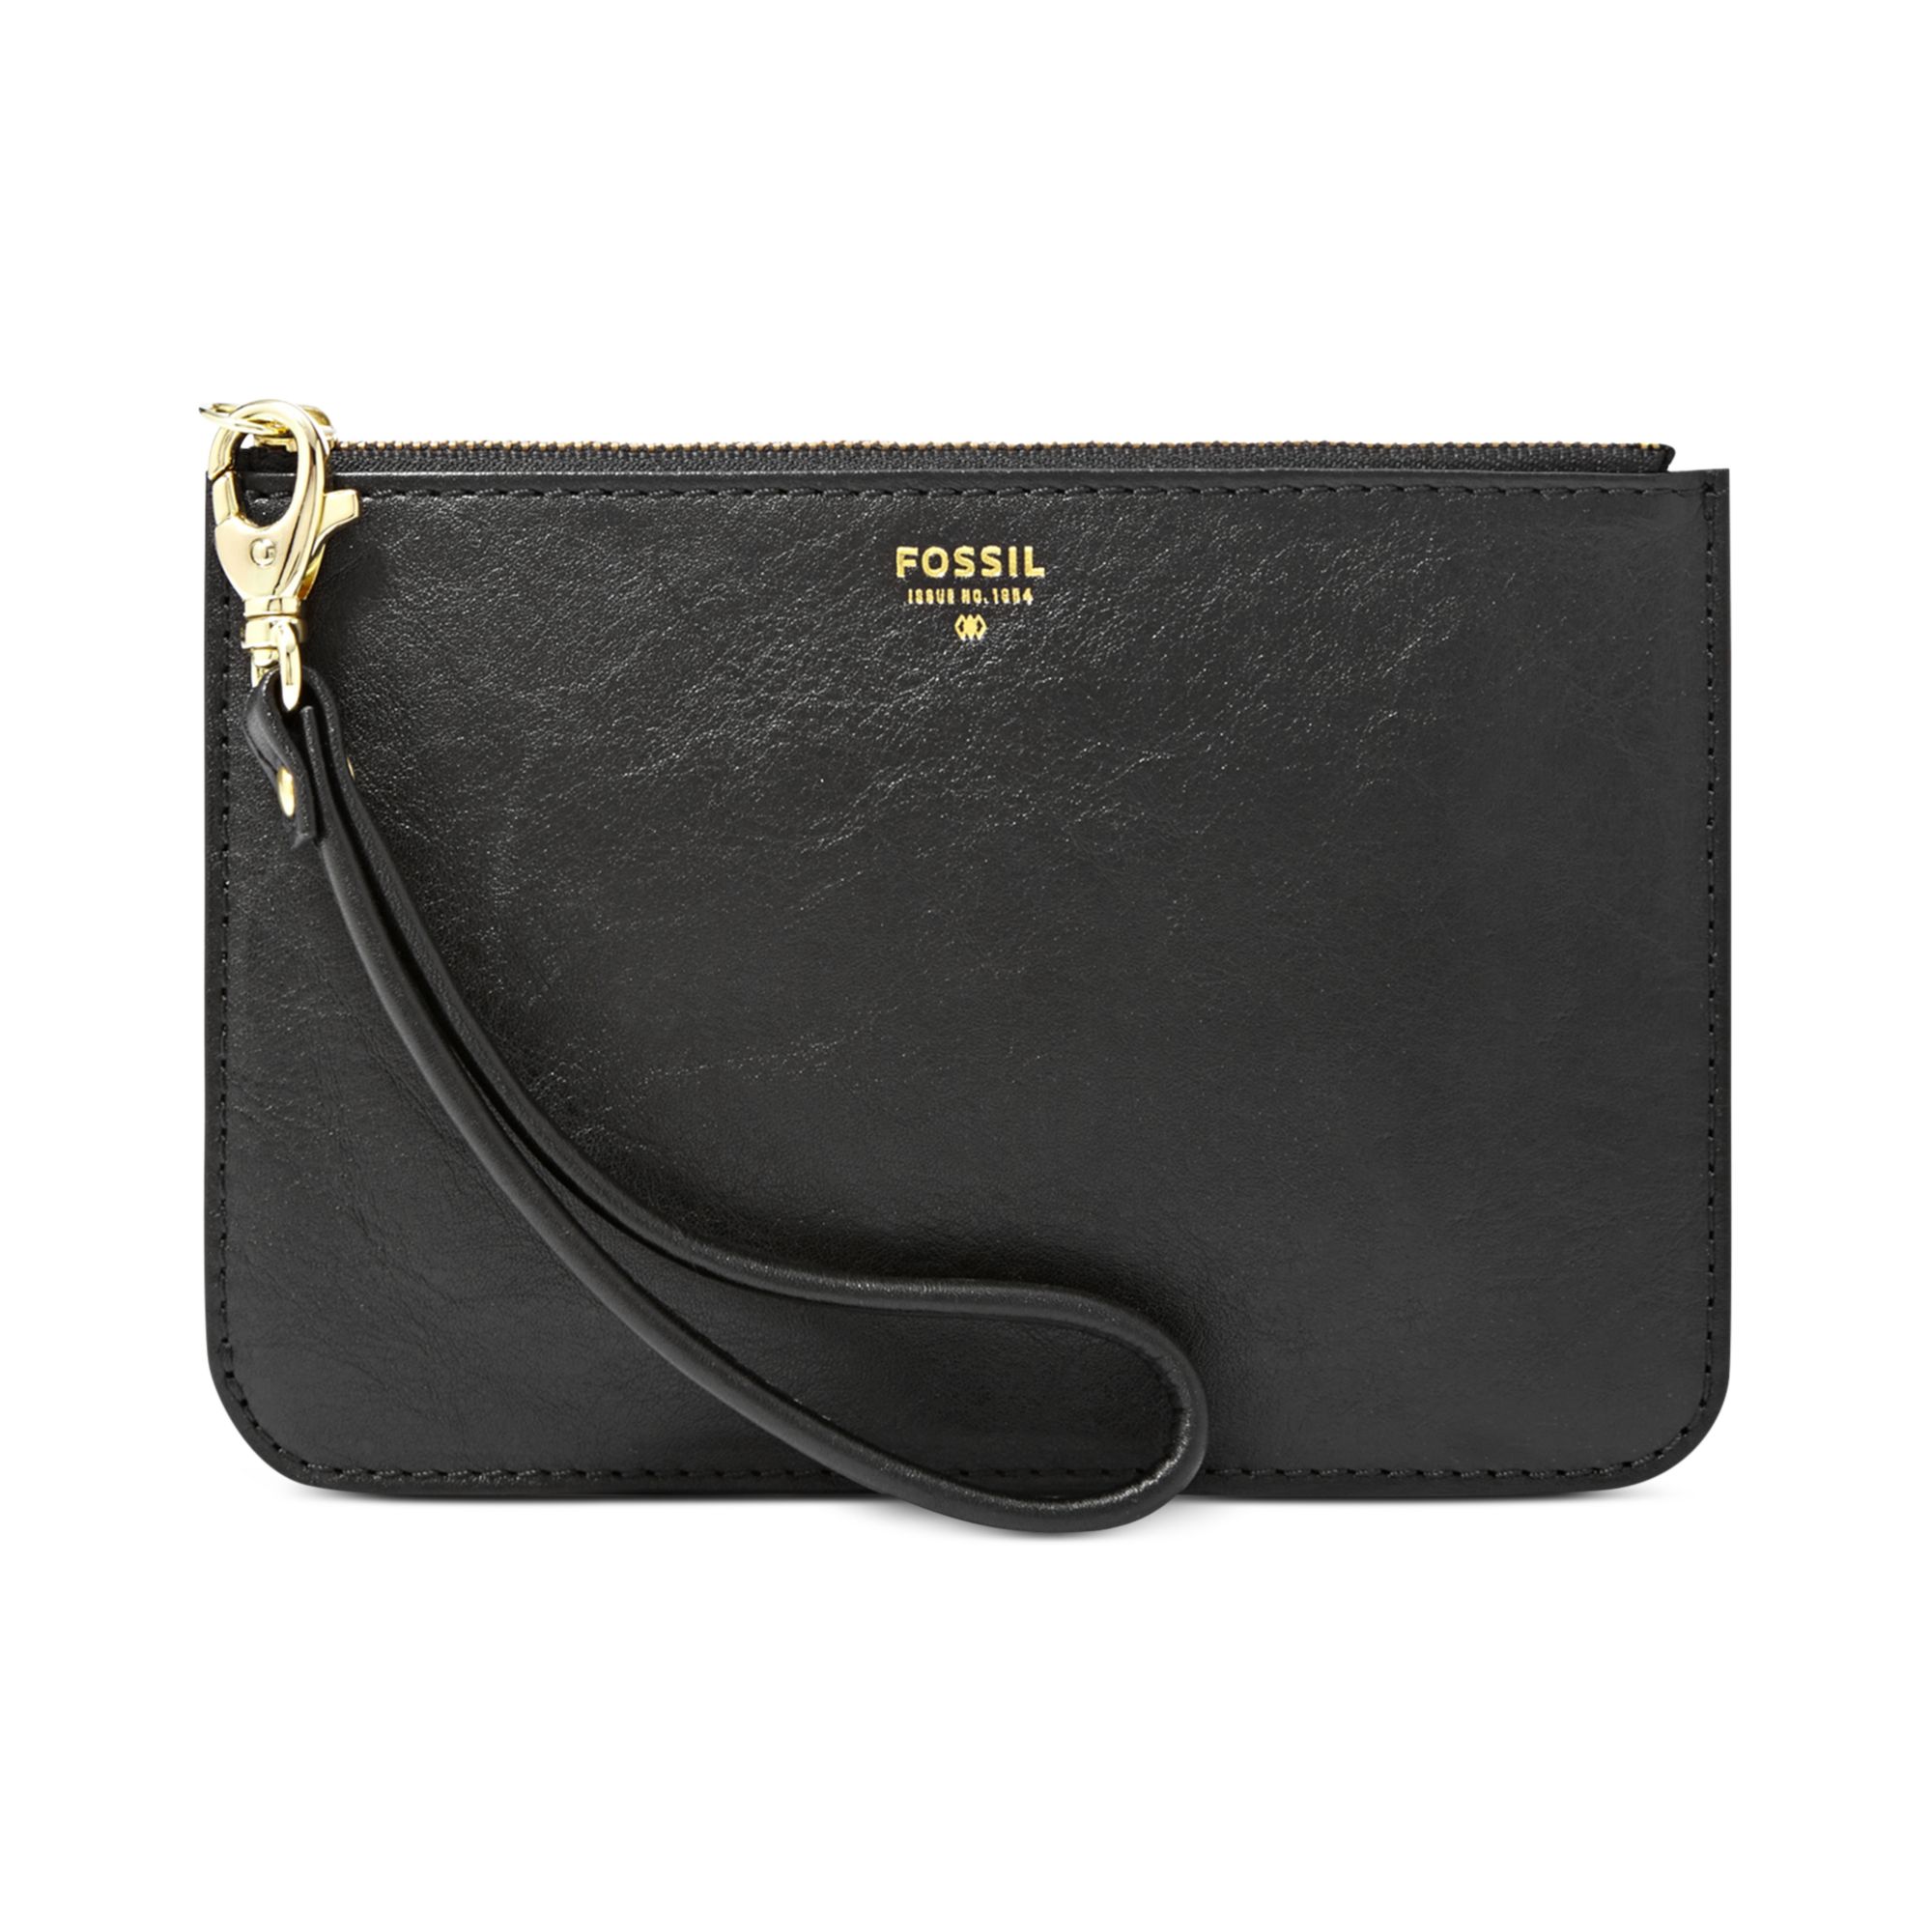 Lyst - Fossil Small Leather Zip Pouch in Black